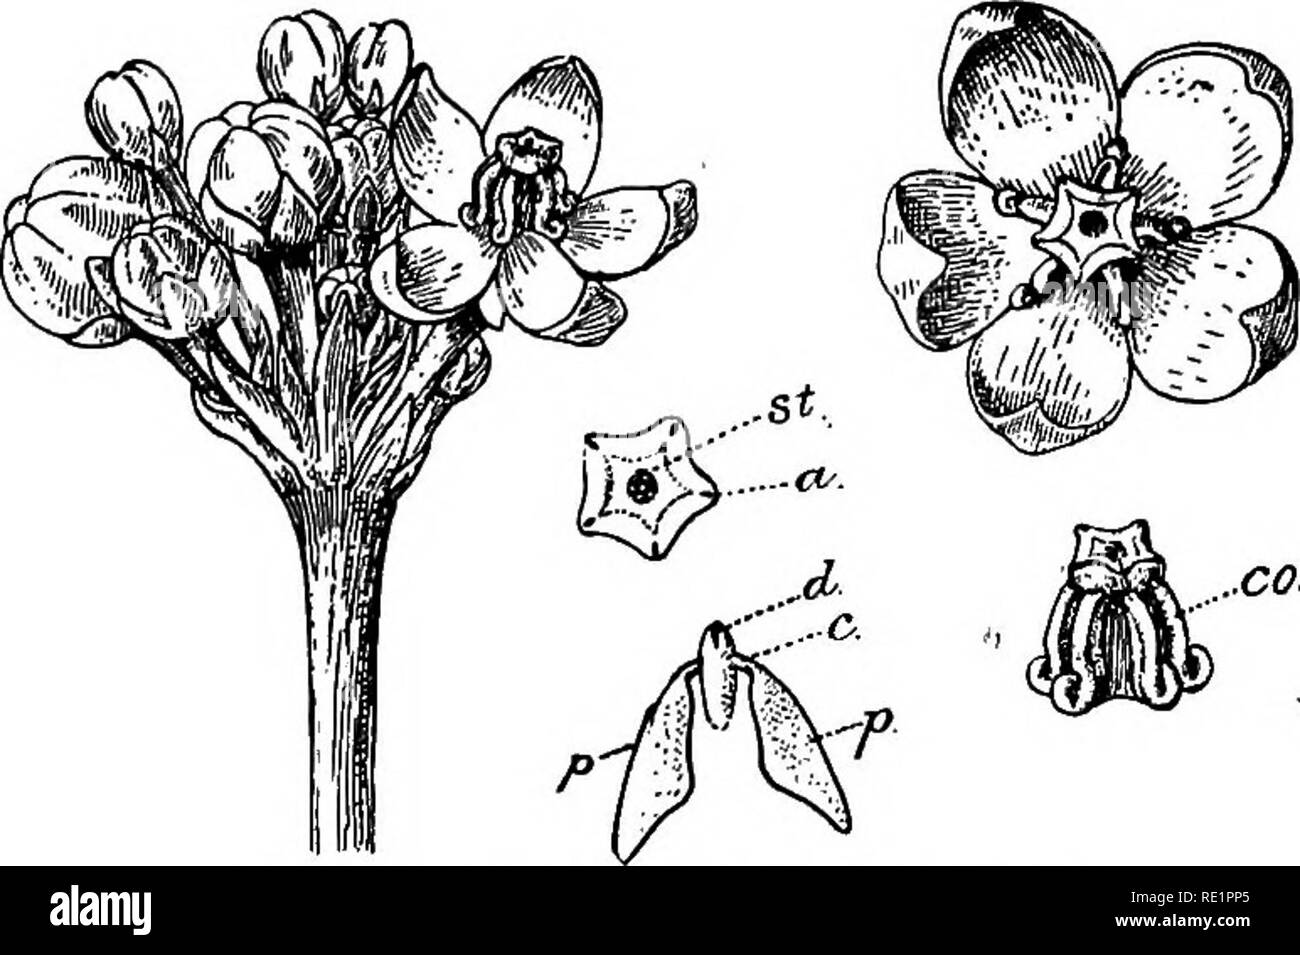 . A manual of Indian botany. Botany. 242 CLASSIFICATION able to penetrate to the nectar. The mechanism of the flowers of Vinca rosea, tagar and malati, excludes autogamy and induces allogamy. Nat. Order 15. Asclepiadacece.—Herbs or shrubs, usually twining, with milky juice. Leaves usually opposite, entire. Sepals 5, connate in an inferior calyx. Petals 5, connate, lobes valvate, throat of the corolla with a corona of hairs, scales, or processes. Stamens 5, the filaments united in a hollow column. Fig. 208. — Akanda {Calotrofiis gigantea) st. Stigma. «, Anther, d. Disk, t, Caudicle. /, Pollinia Stock Photo